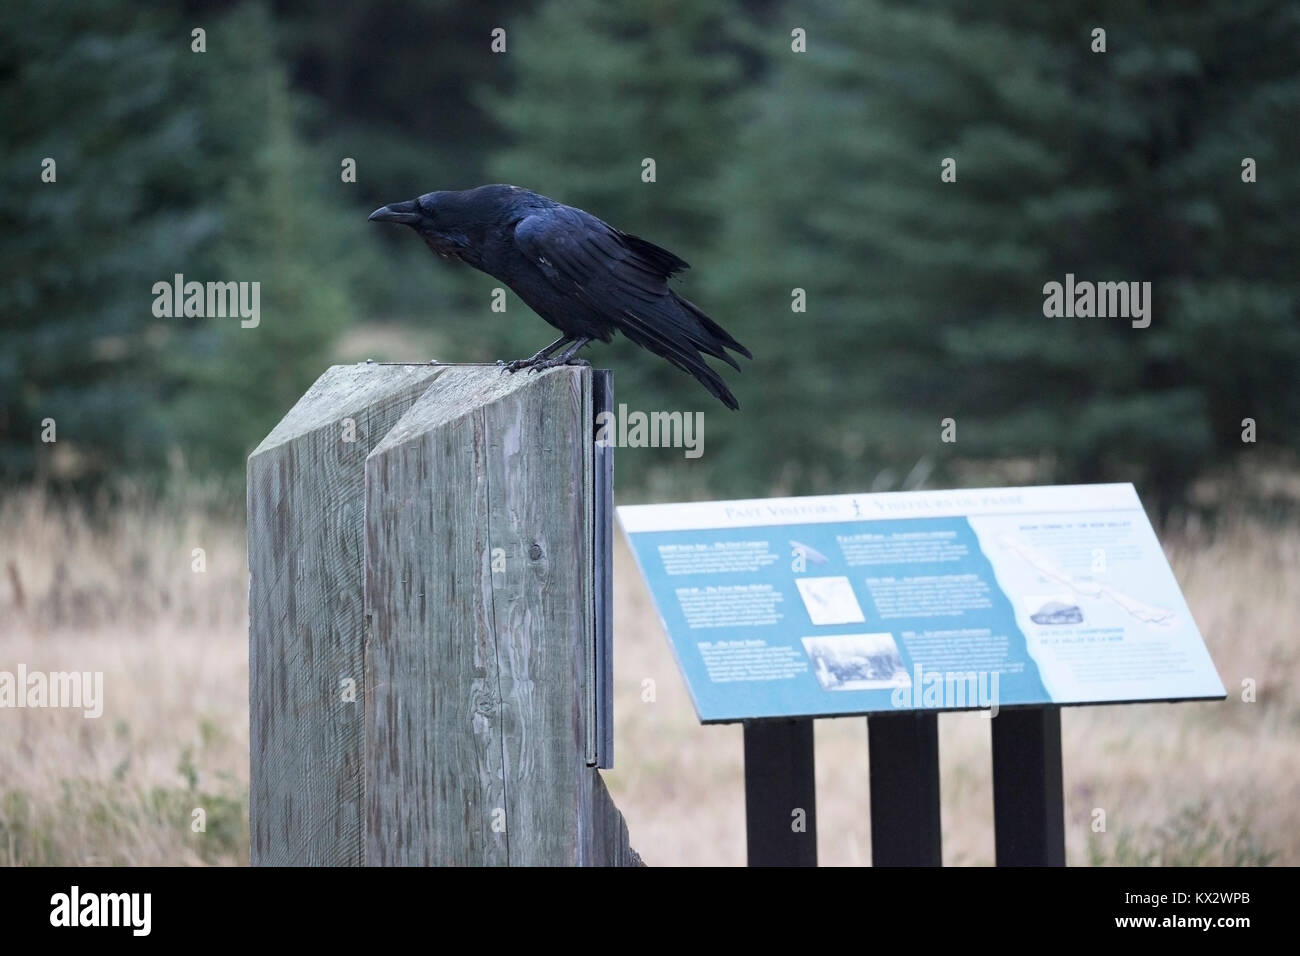 Raven perched on interpretive sign in Banff National Park Stock Photo